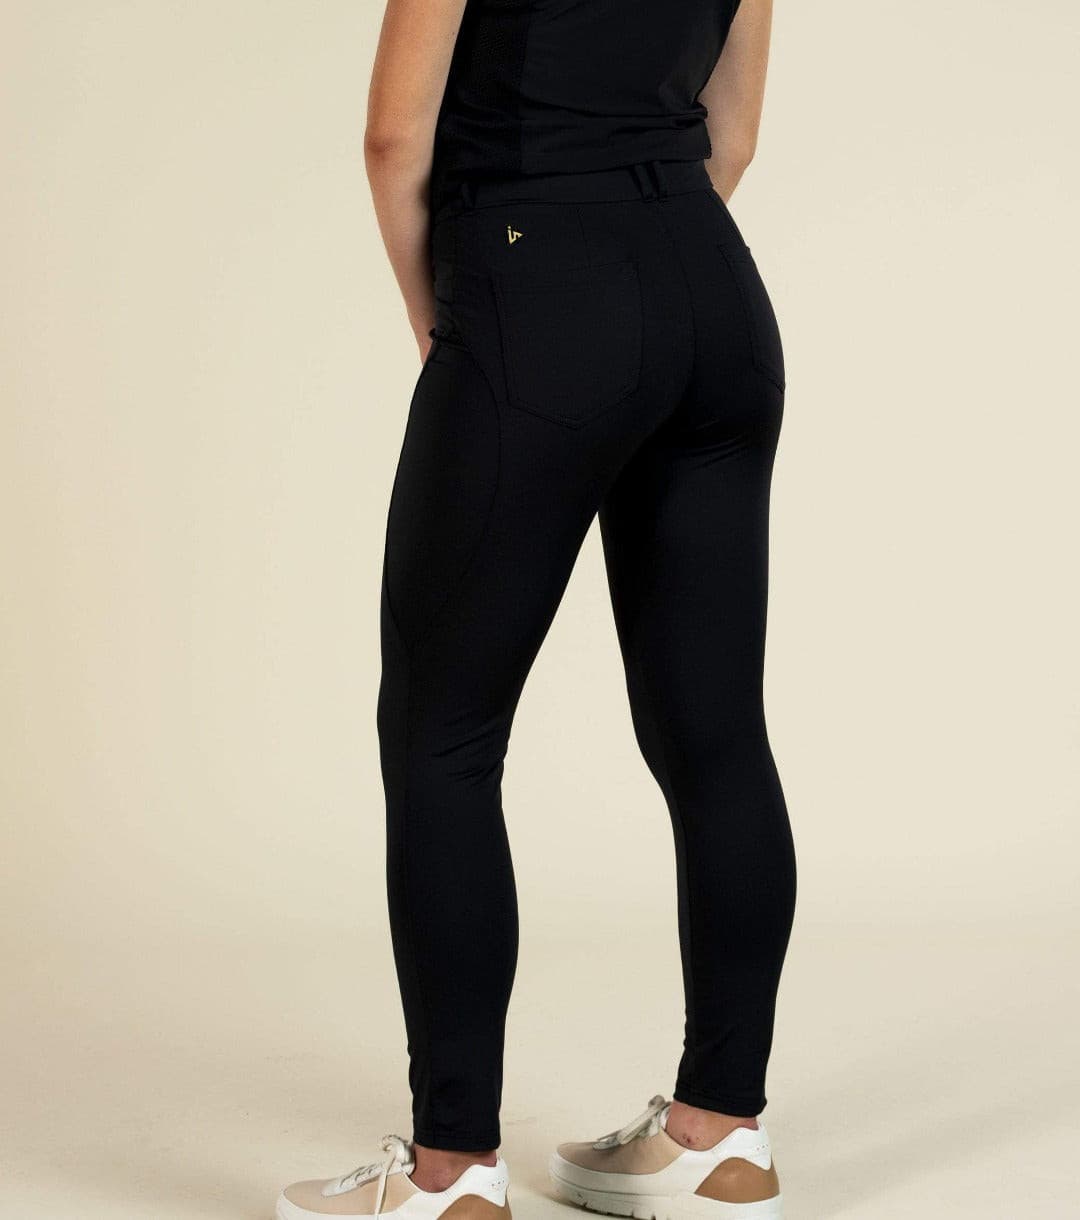 Issette High waisted high-waisted black trousers.